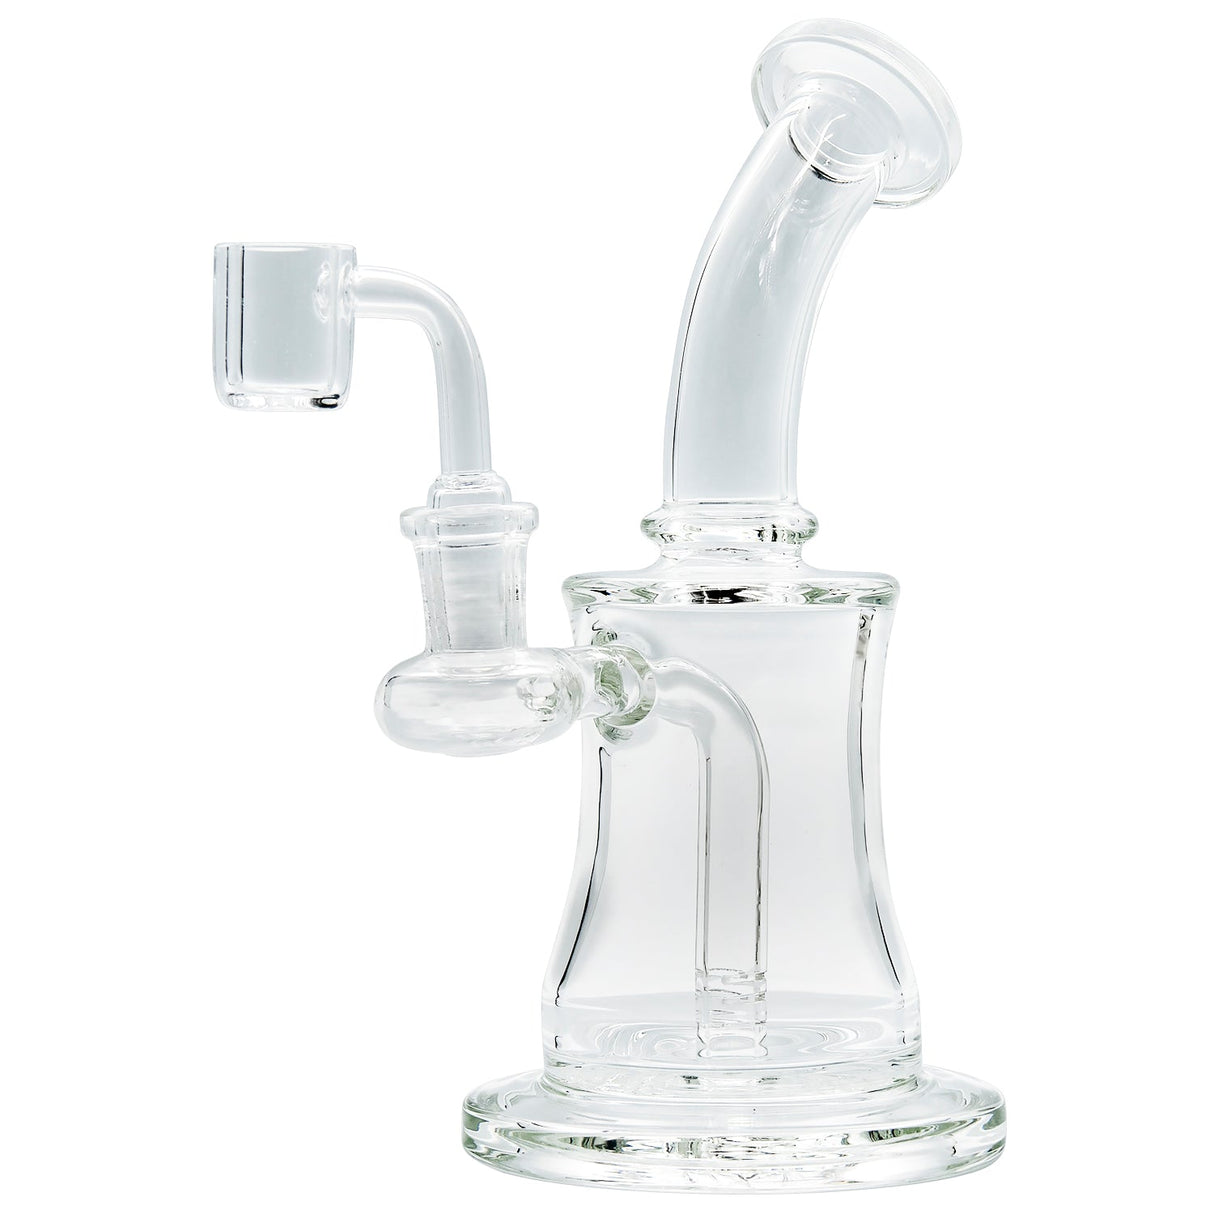 Glassic Crystal Palace Banger Hanger Dab Rig, 8" with Welded Stem and Polished Joint, Front View